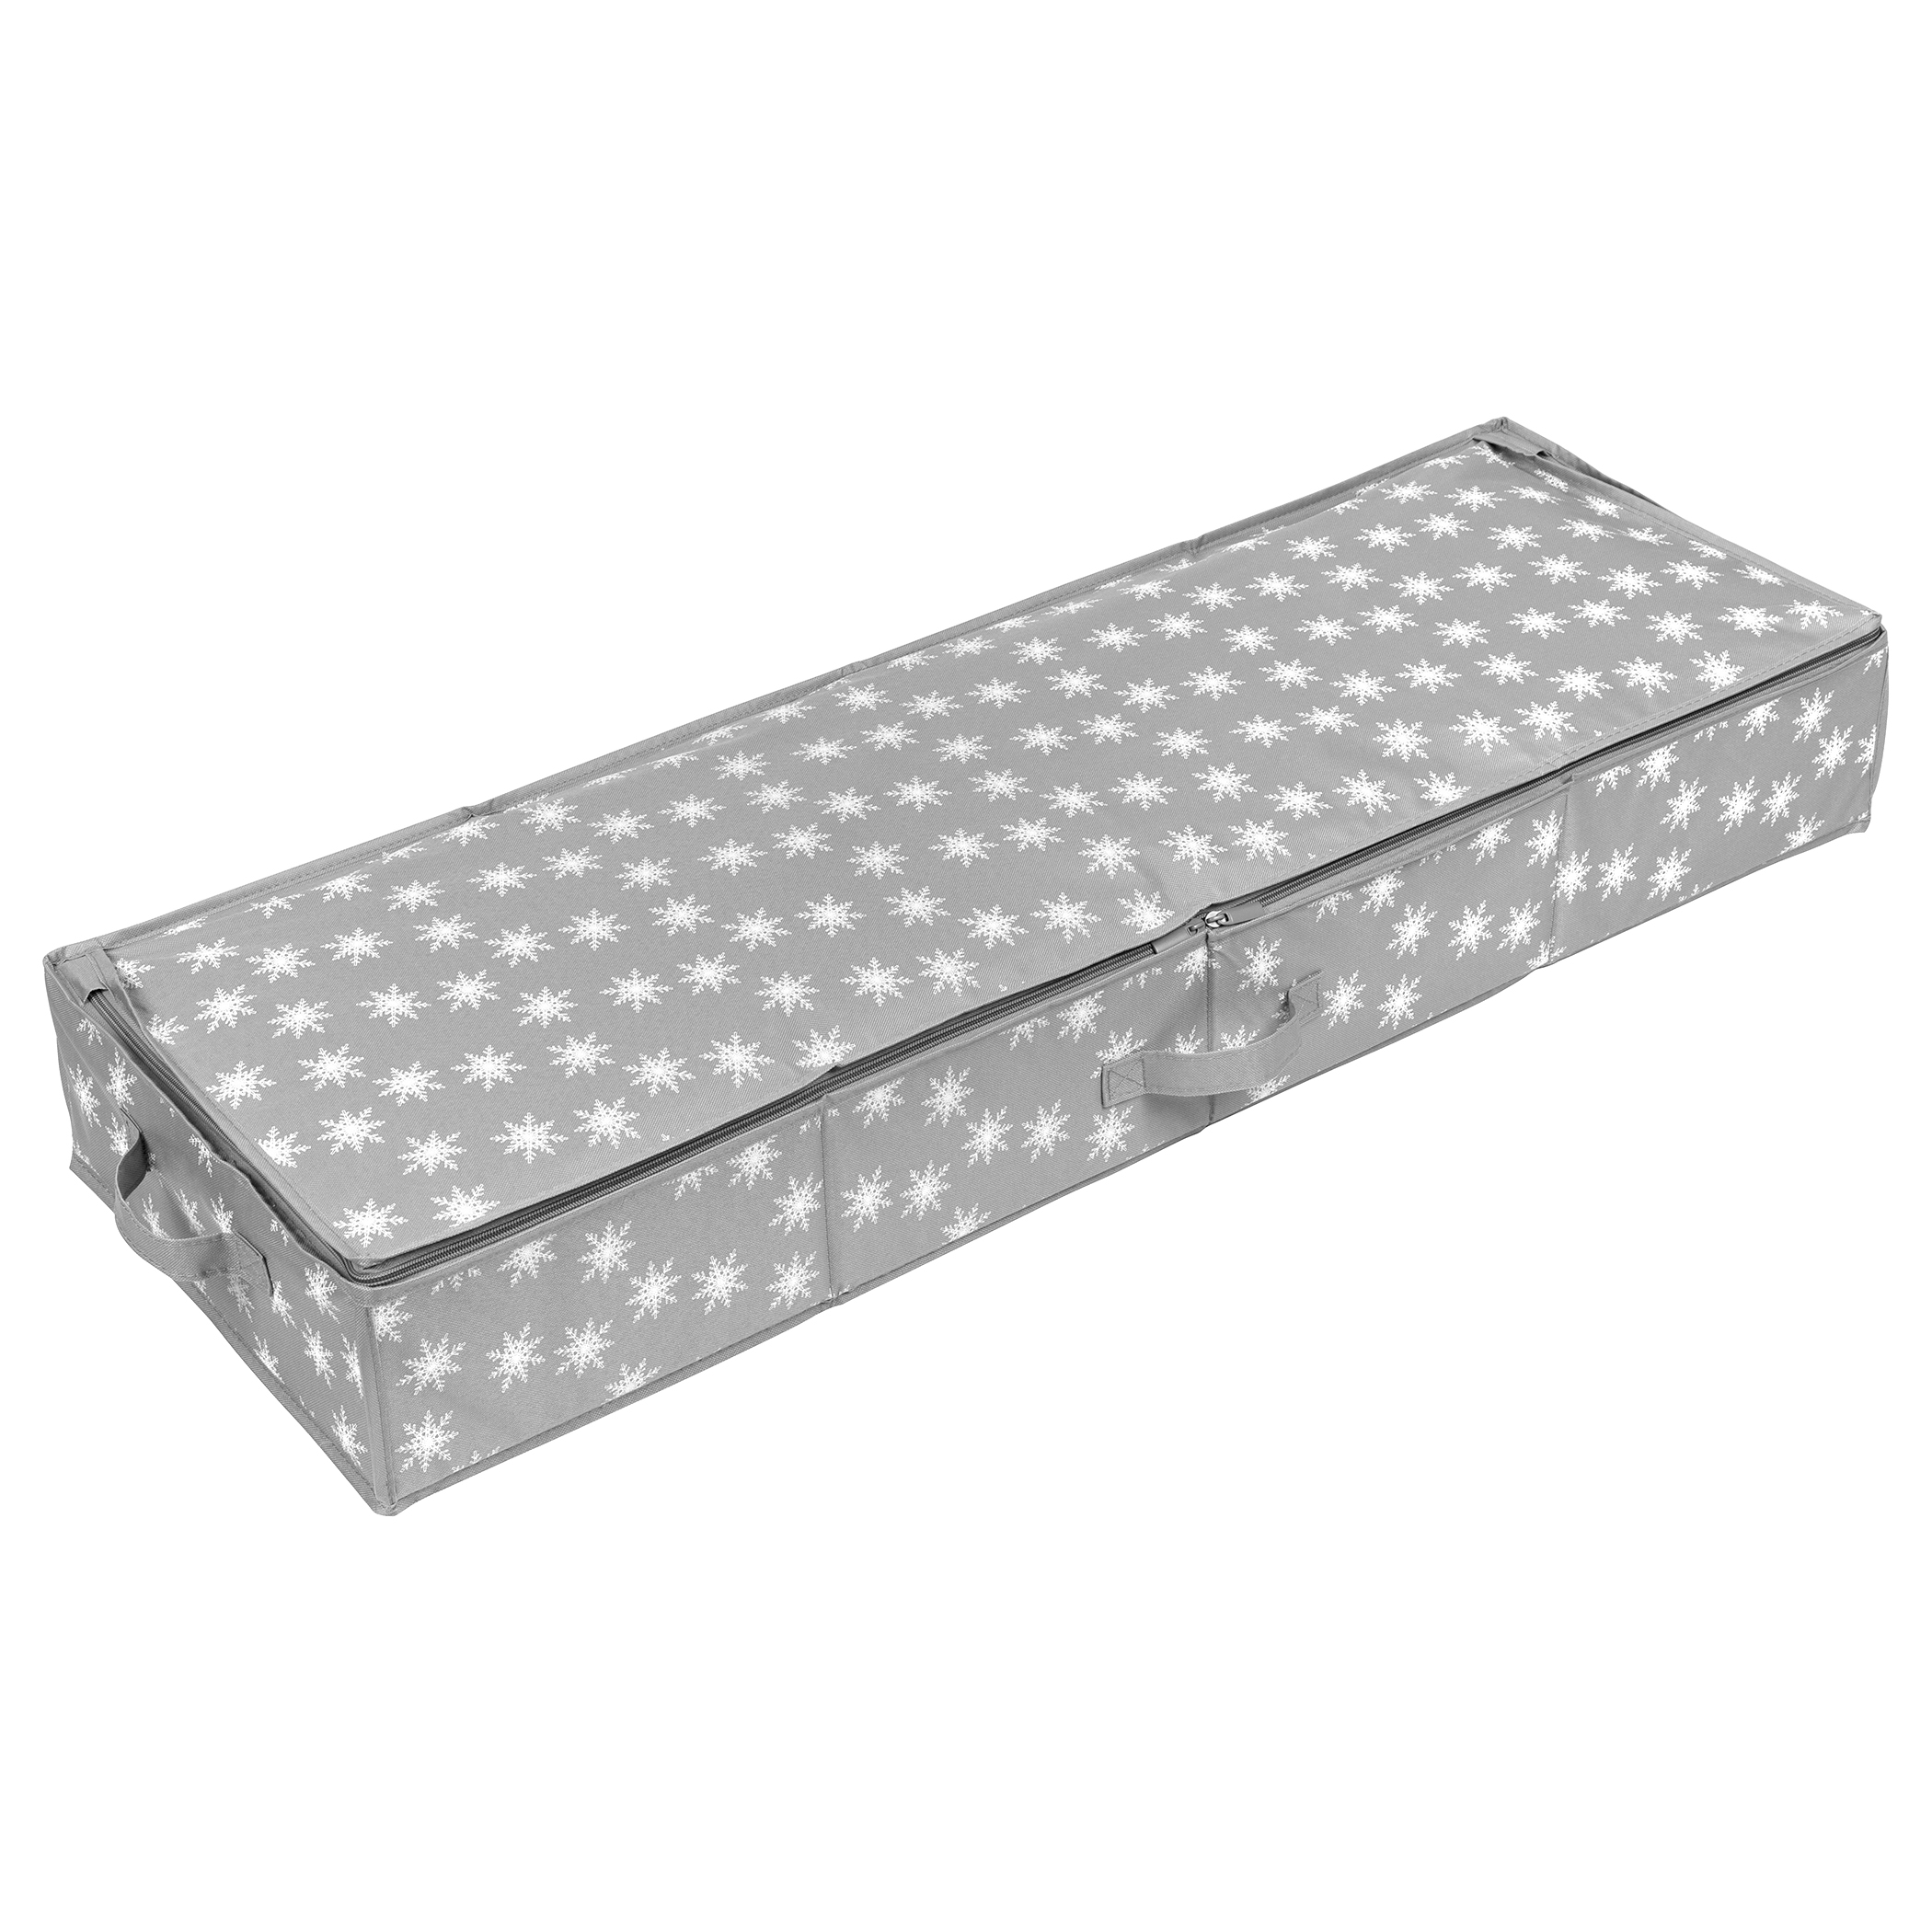 Hold N' Storage Christmas Storage Wrapping Paper Organizer  and Under Bed Storage Container  600D Material - image 5 of 8